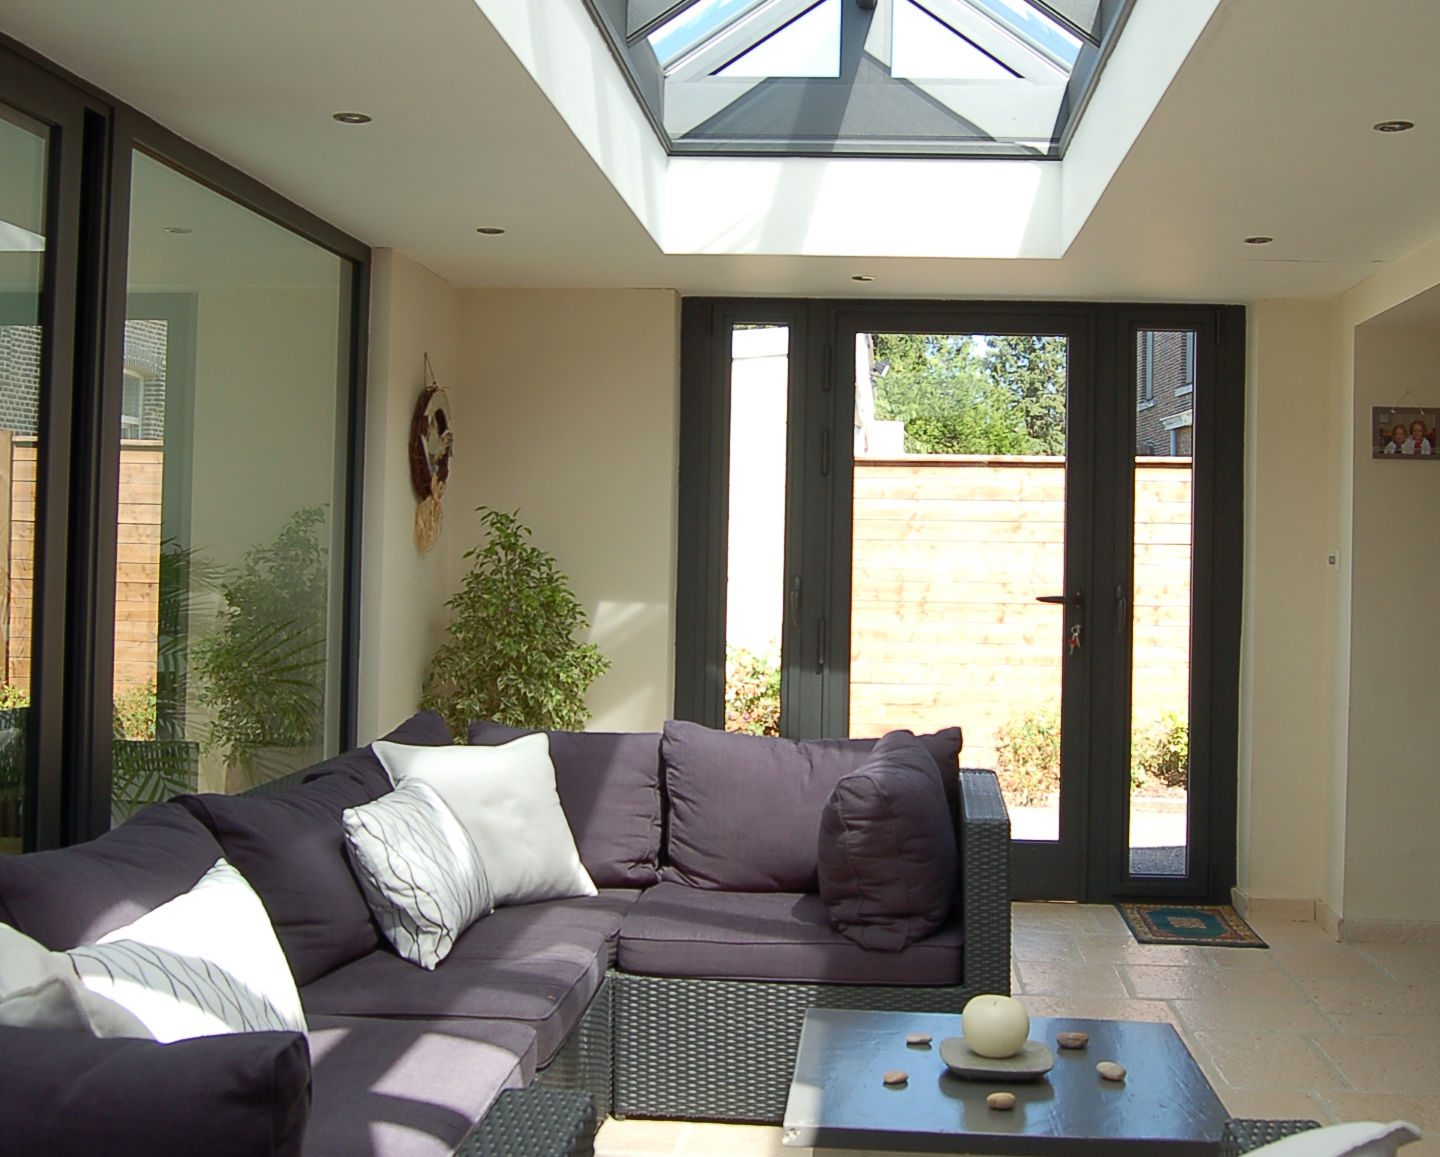 Roof lantern in a modern home with glass doors